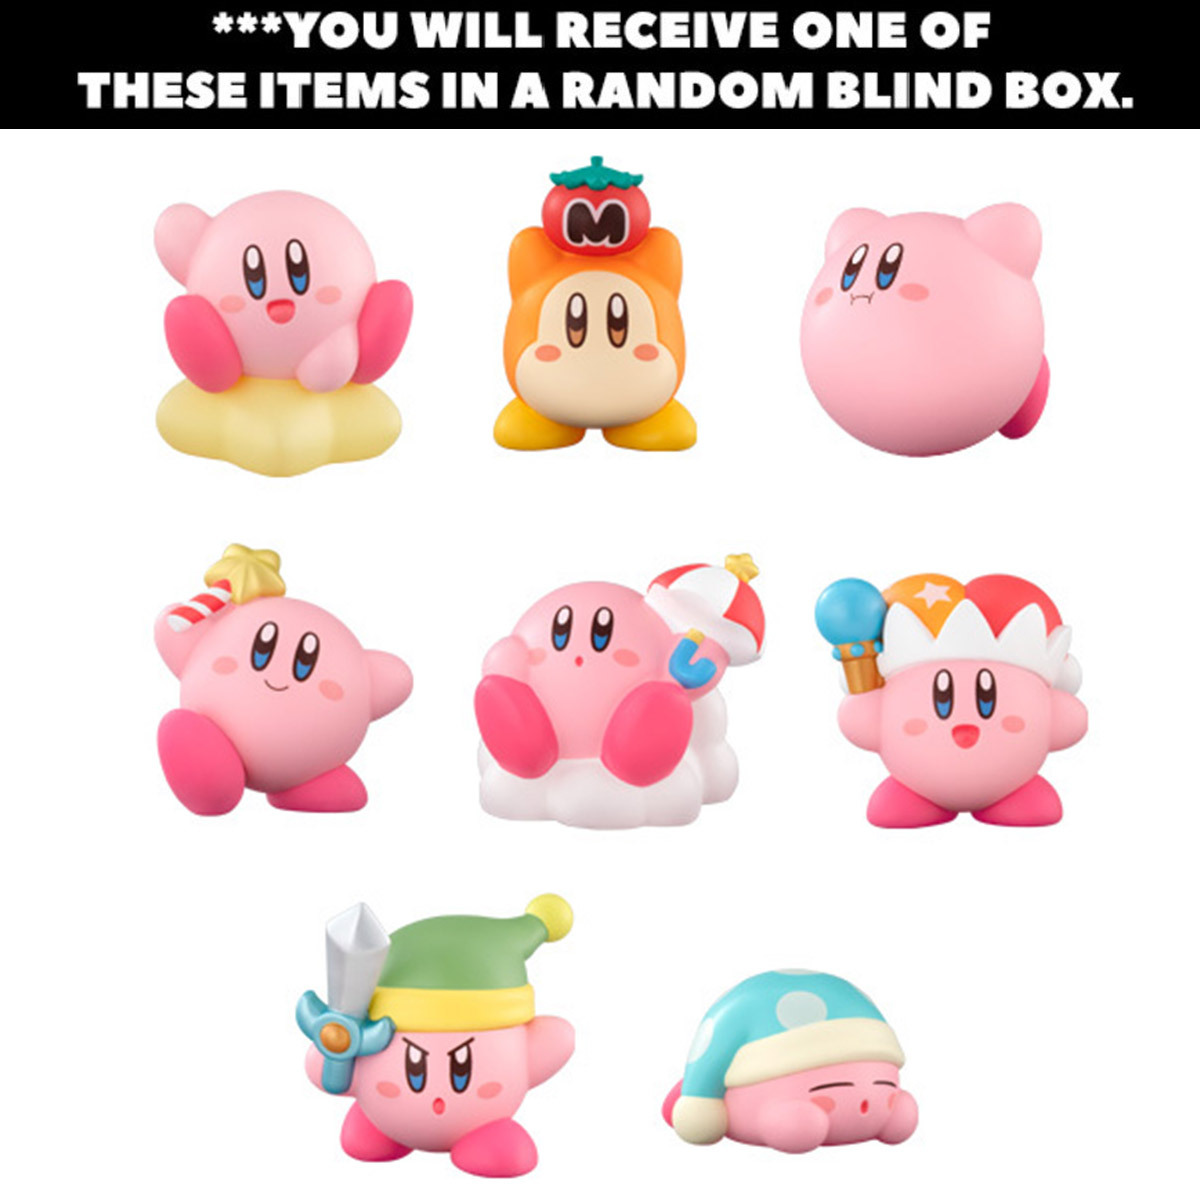 Kirby Friends Series Vol 1 Blind Box image count 0